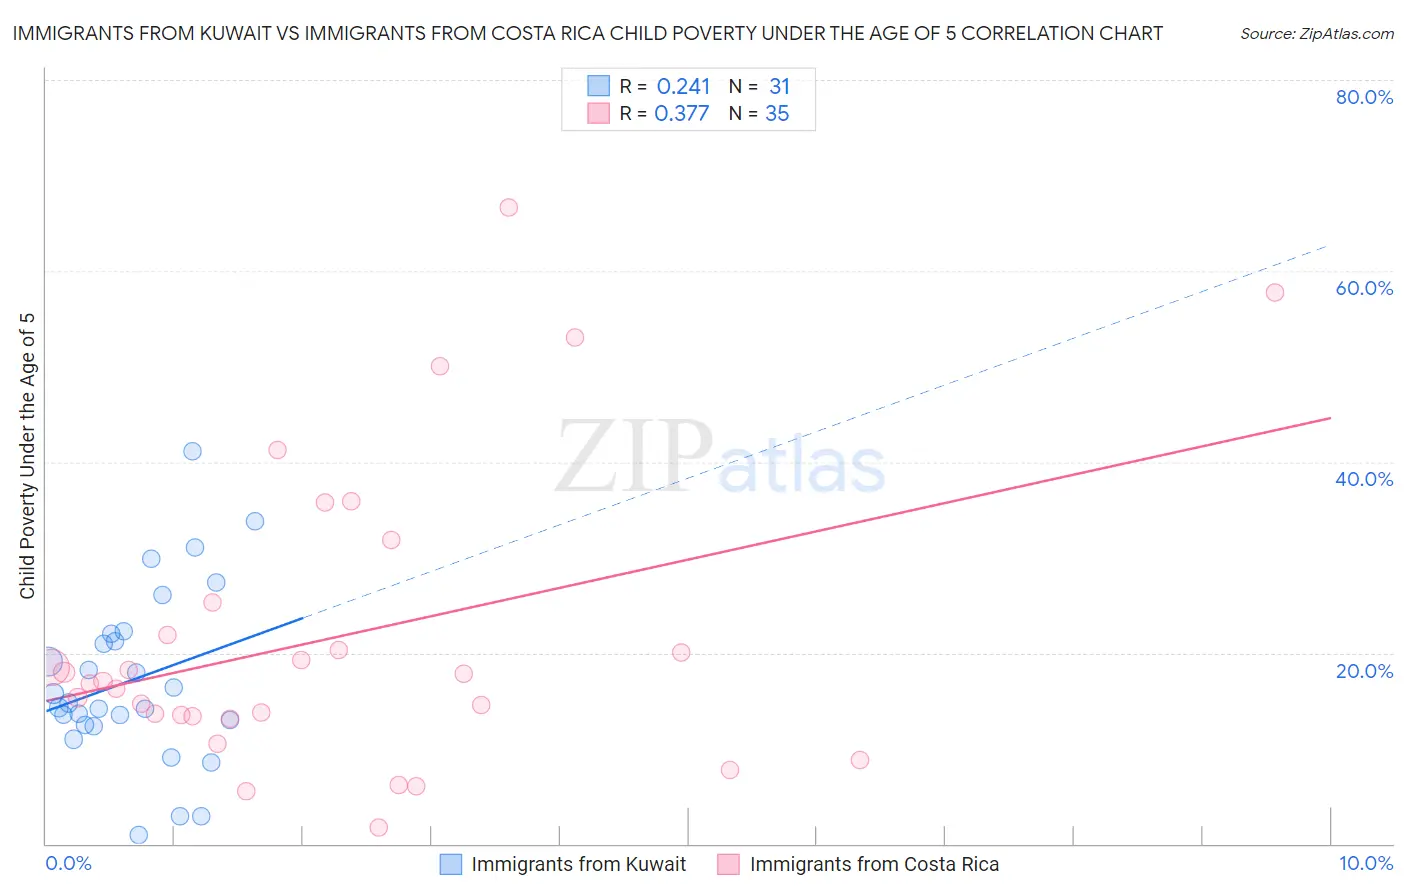 Immigrants from Kuwait vs Immigrants from Costa Rica Child Poverty Under the Age of 5